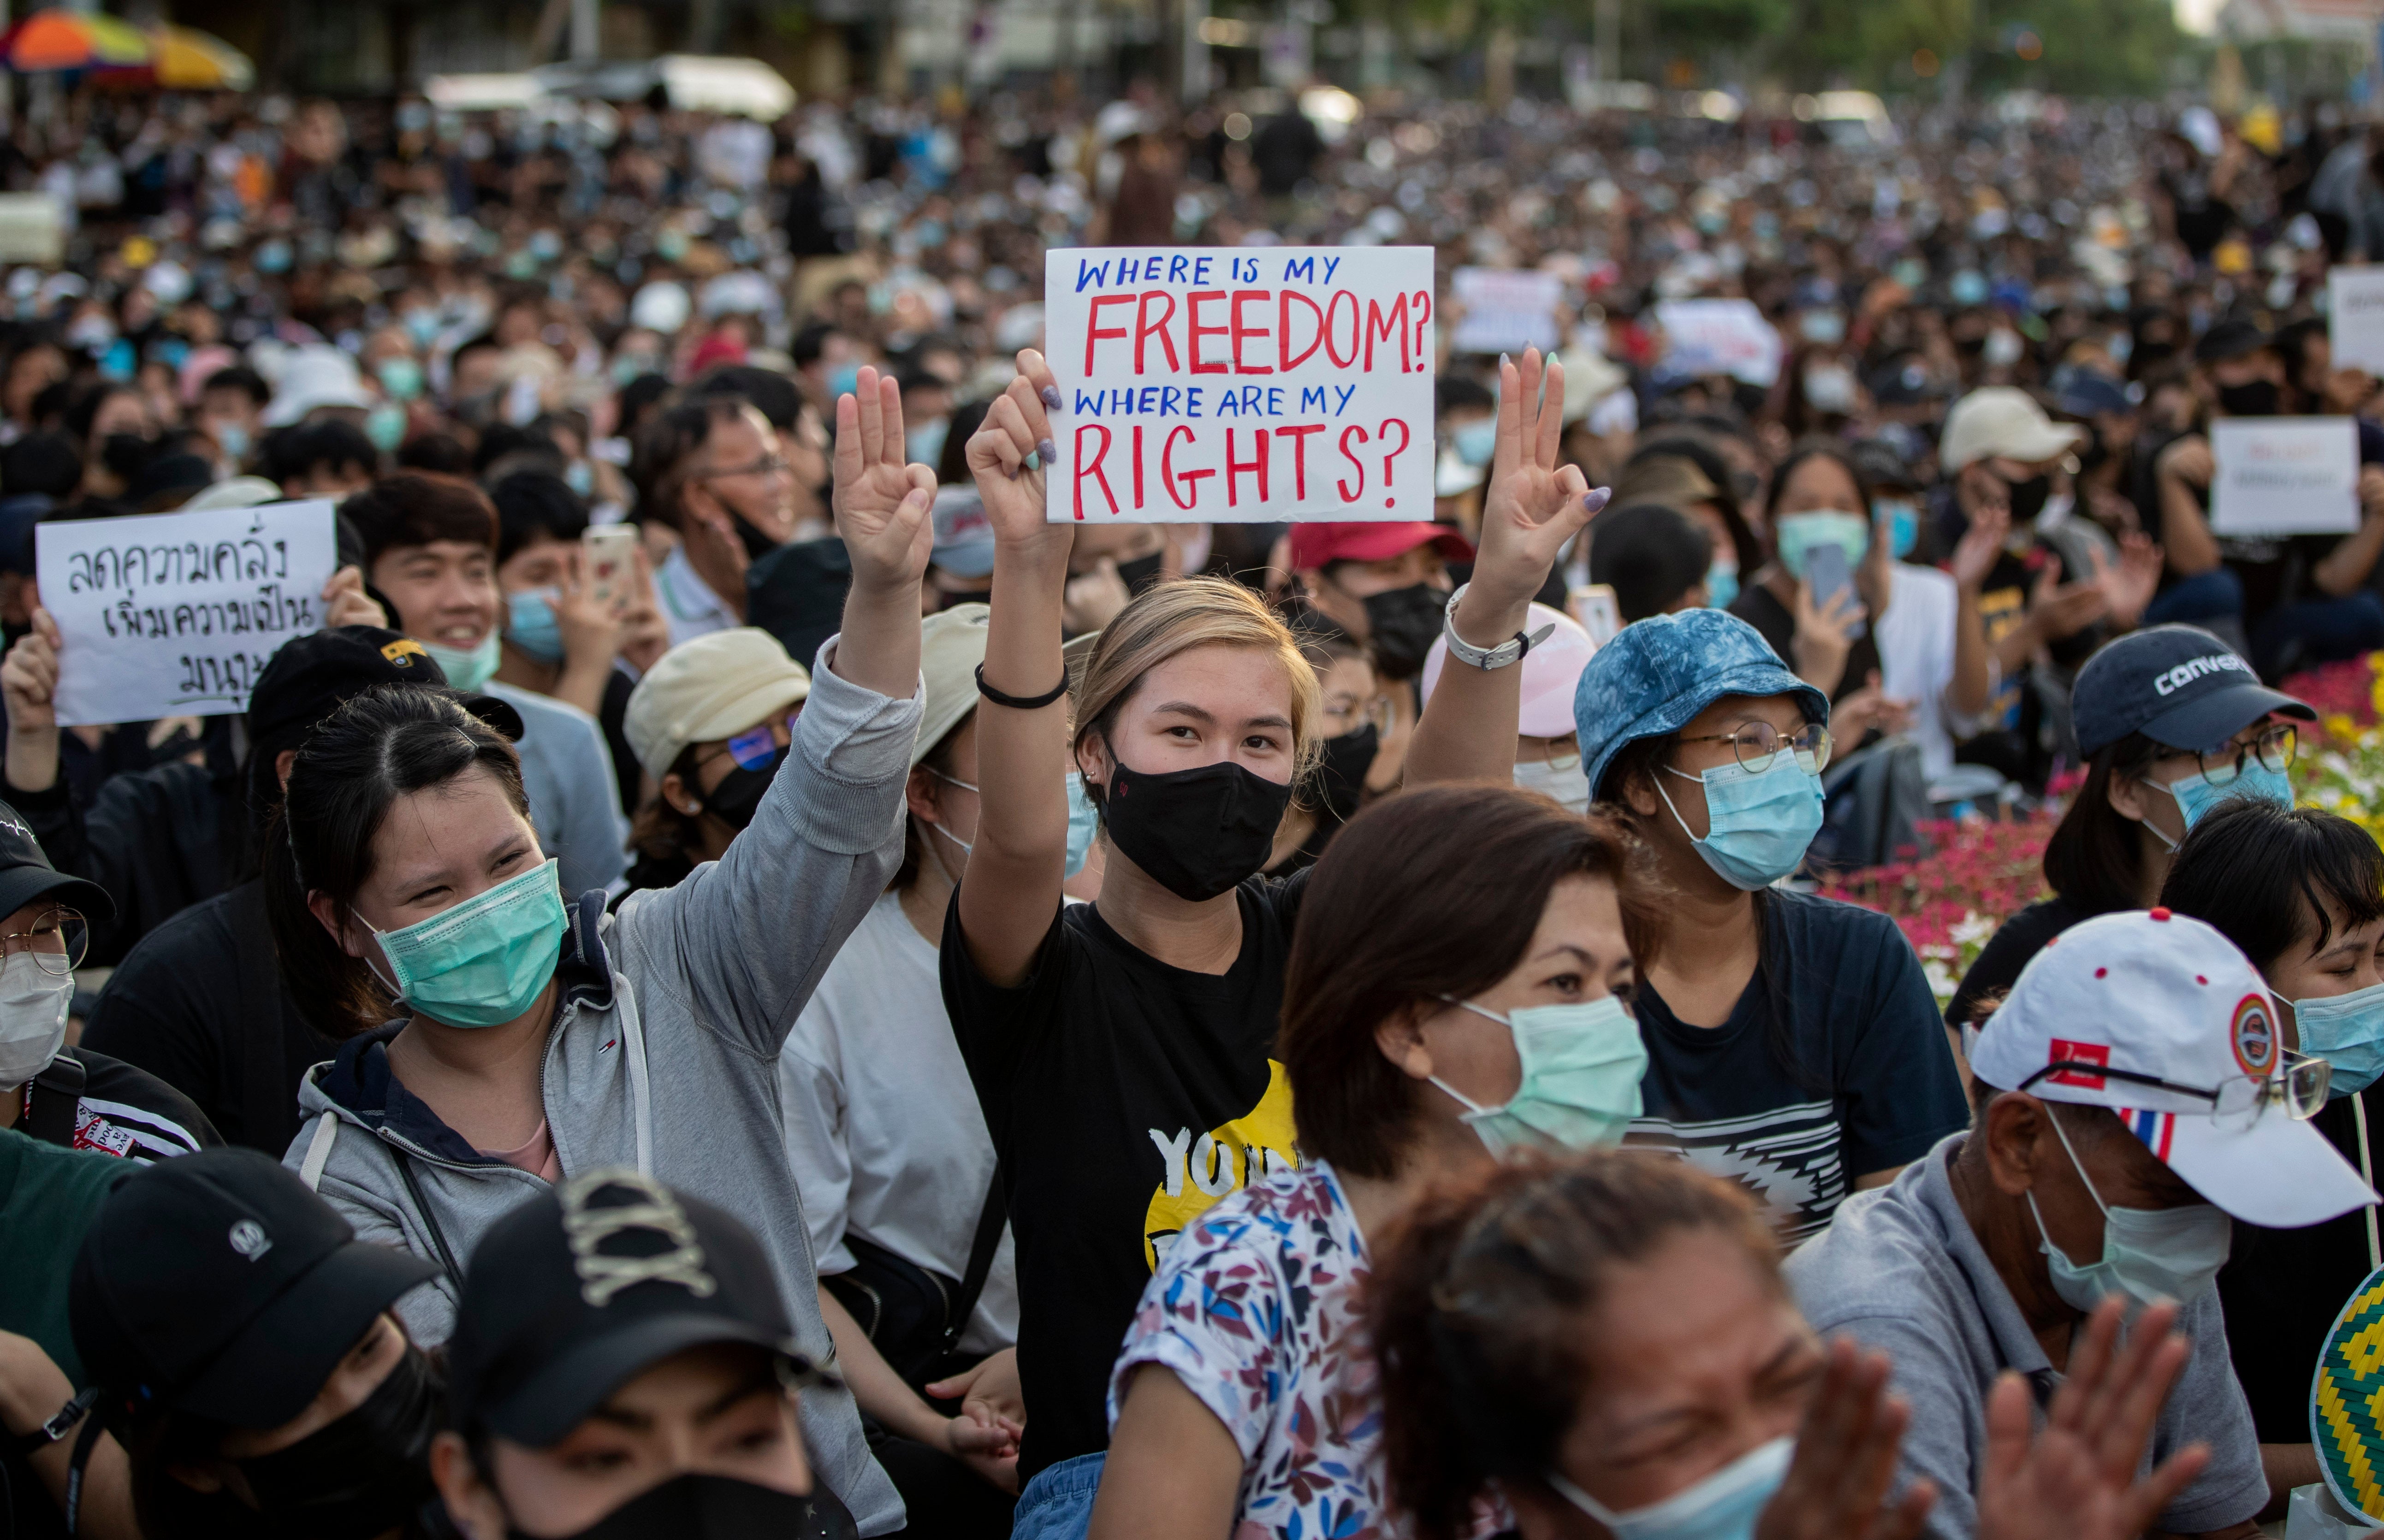 Thailand Protests